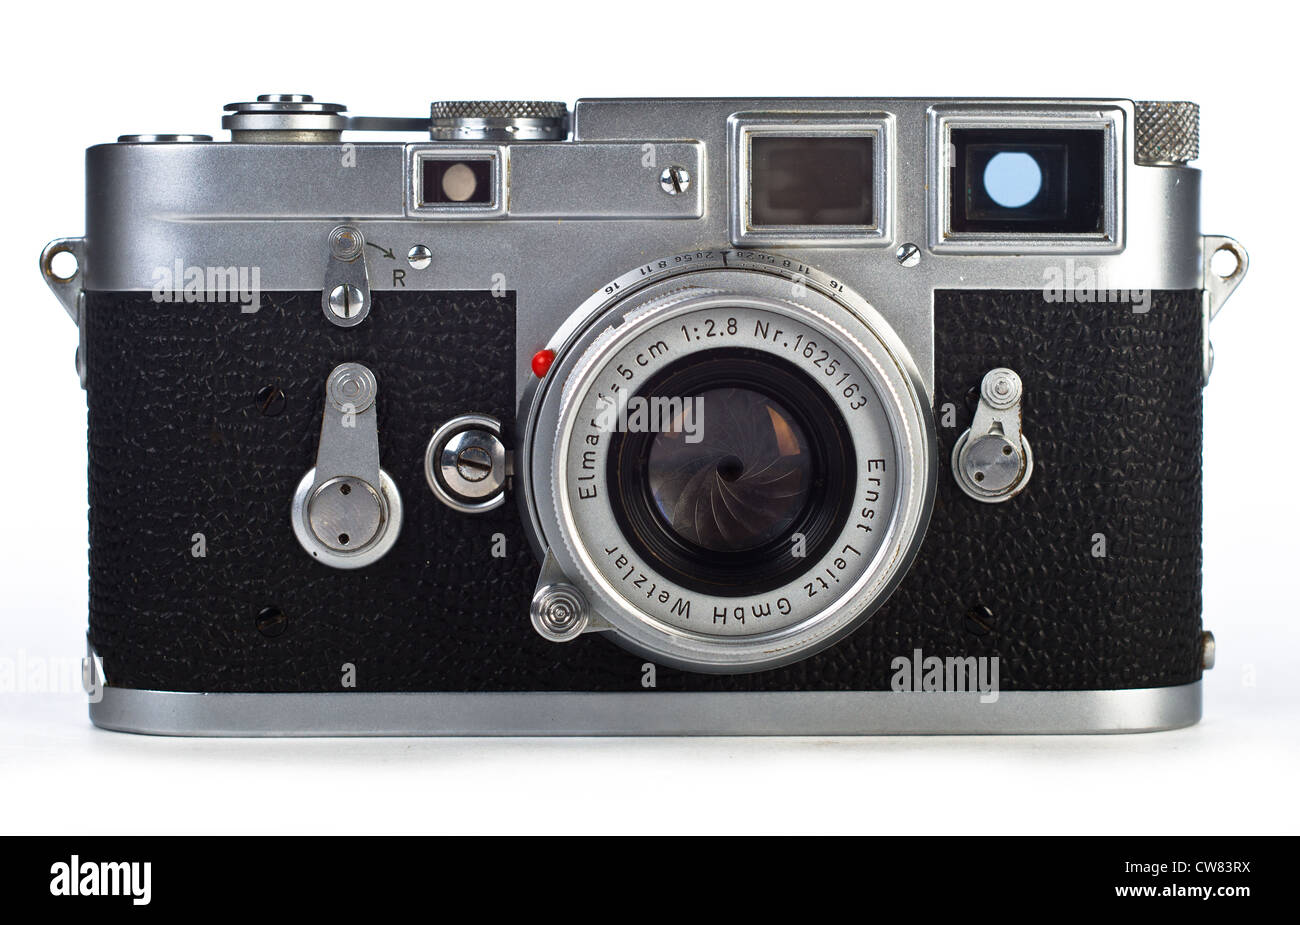 Leica M3 Leitz Rangefinder camera on White Background with Collapsible Elmar 50mm f2.8 M Lens Stock Photo